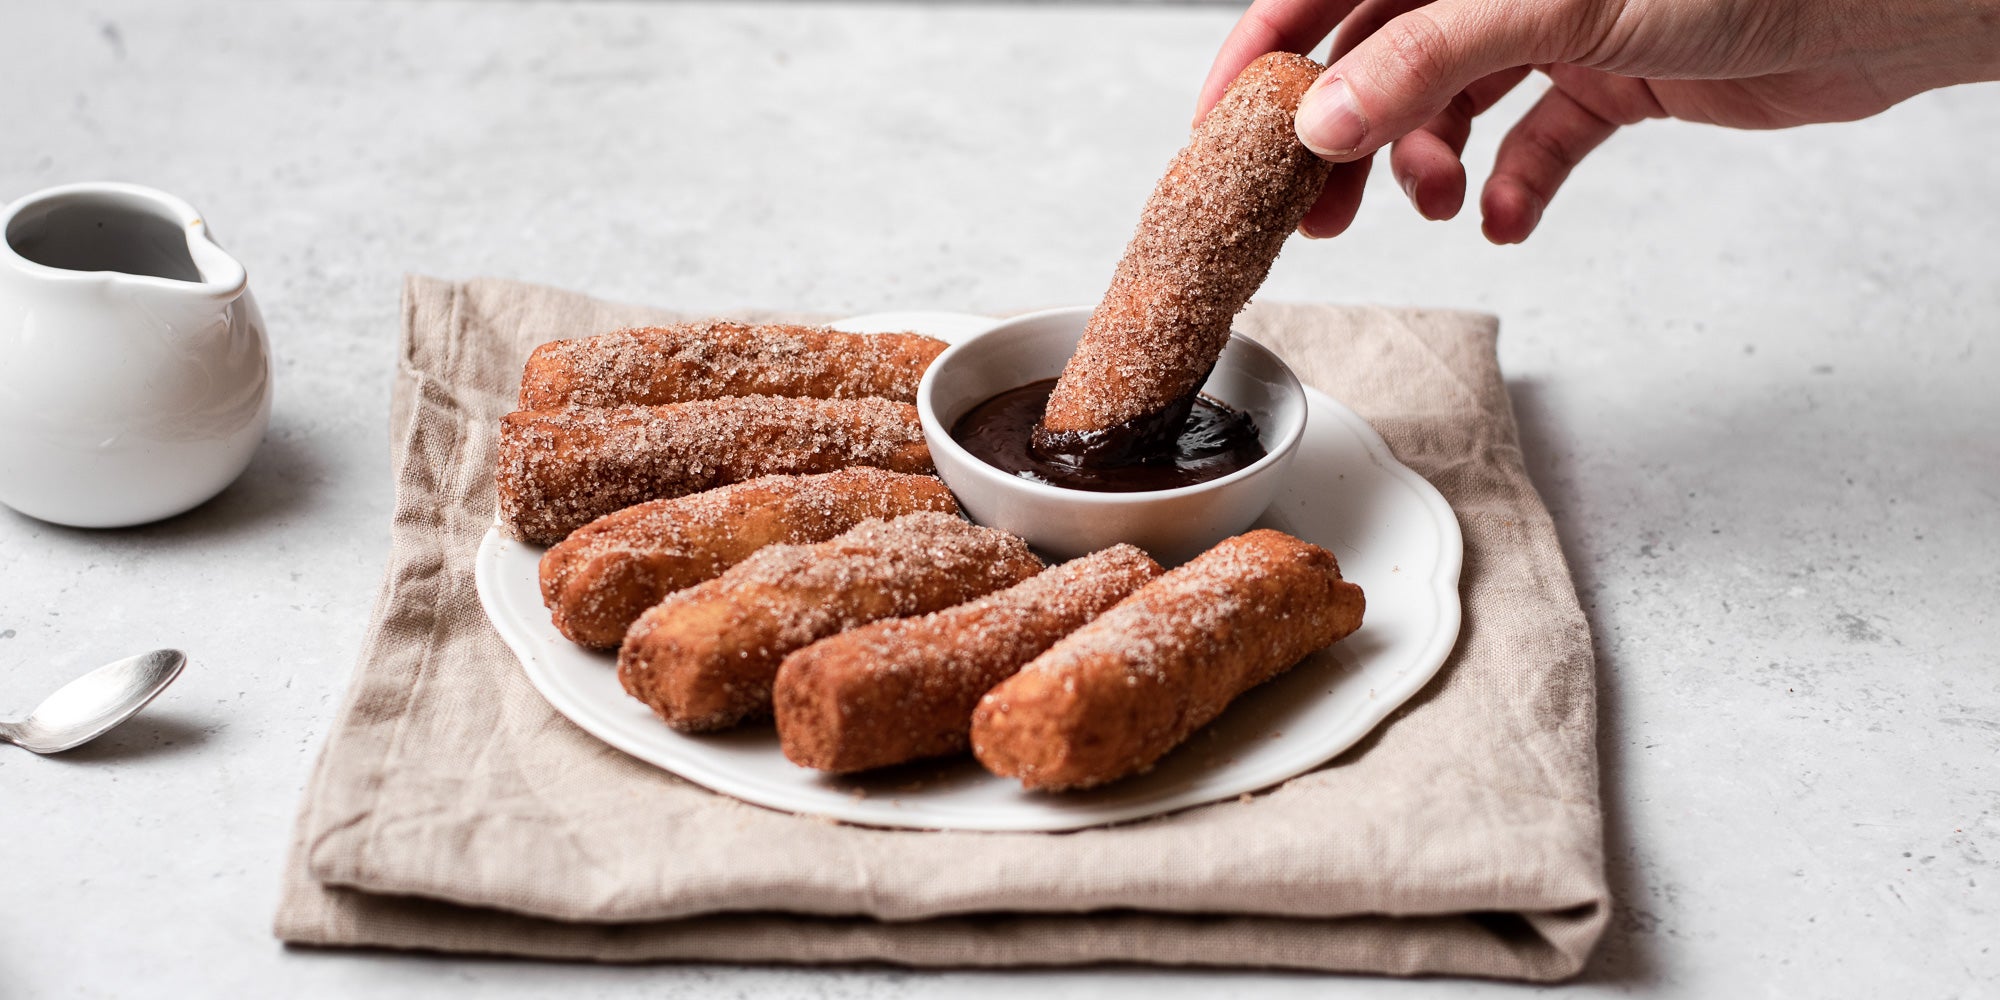 Doughnut Sticks with hand, being dipped into Chocolate Dip